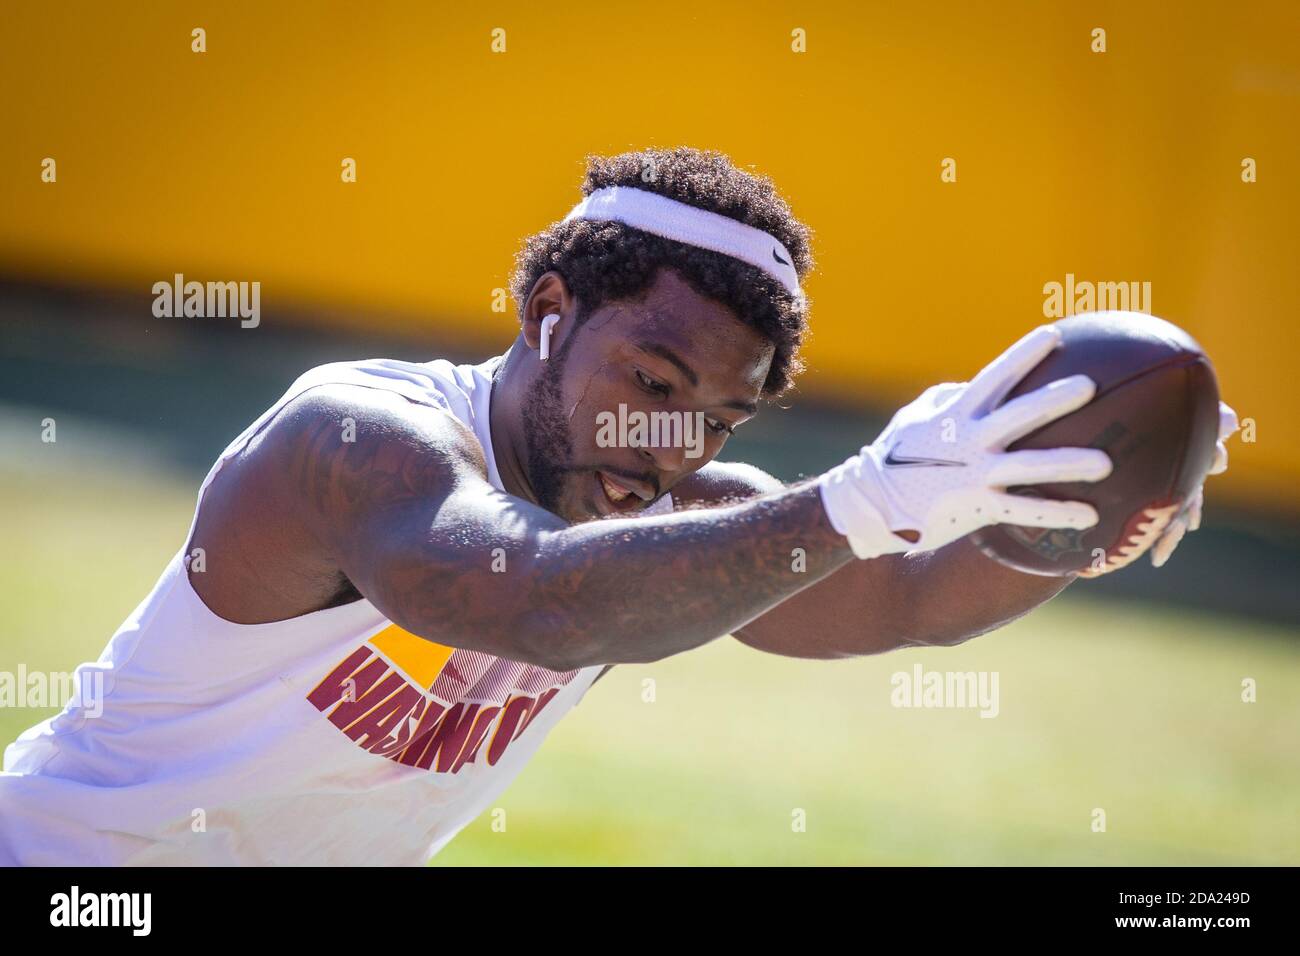 Landover, Maryland, USA. November 8, 2020: Washington Football Team wide receiver Steven Sims (15) warms up before the NFL Game between the New York Giants and Washington Football Team at FedEx Field in Landover, Maryland Photographer: Cory Royster Credit: Cal Sport Media/Alamy Live News Stock Photo